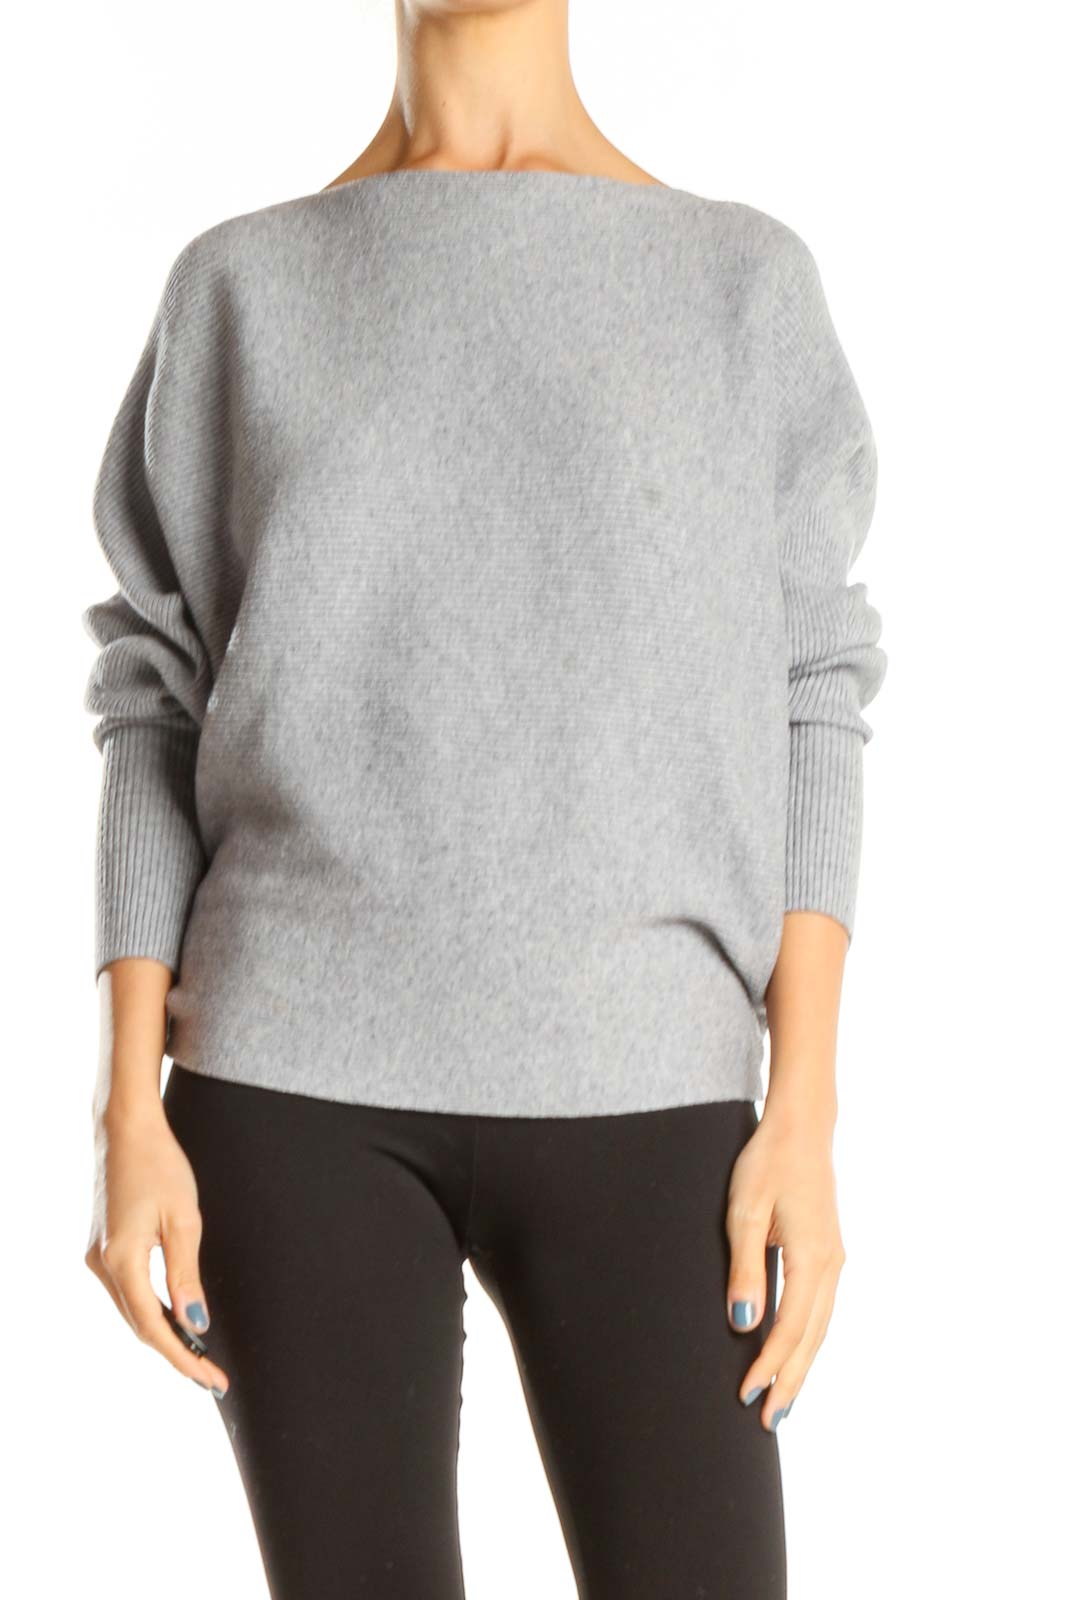 Gray Highneck Sweater Front